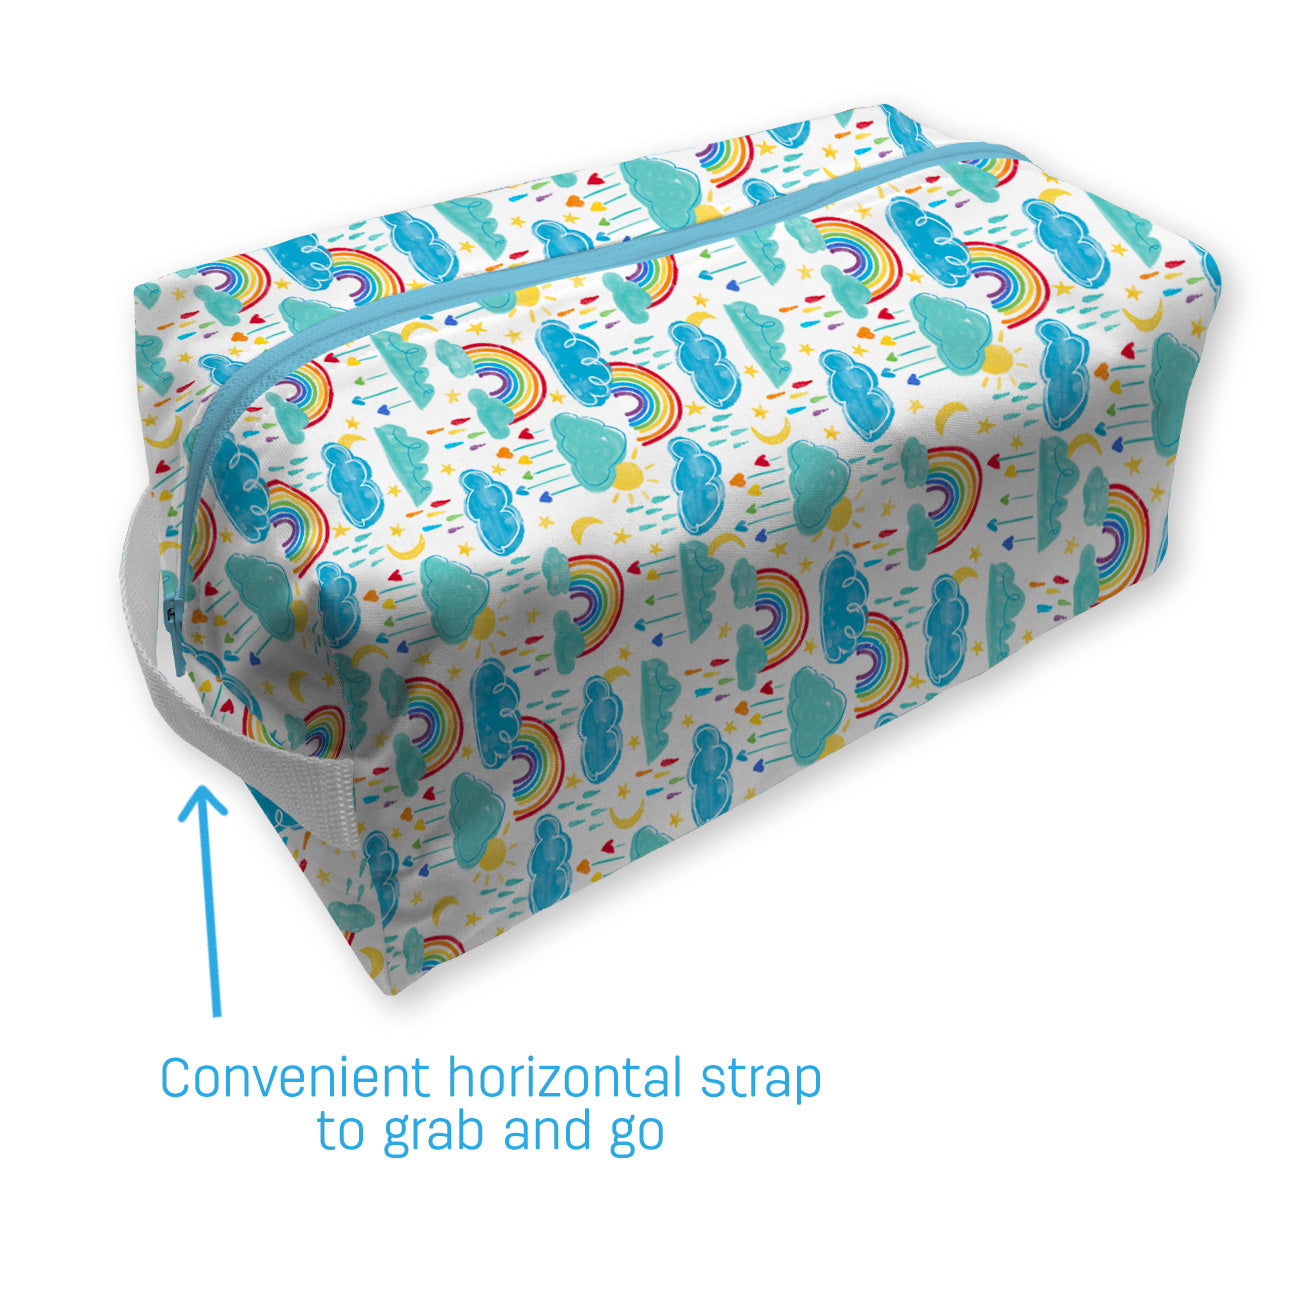 -Image of Thirsties Simple Pod graphic in Rainbow print showing convenient horizontal strap to grab and go